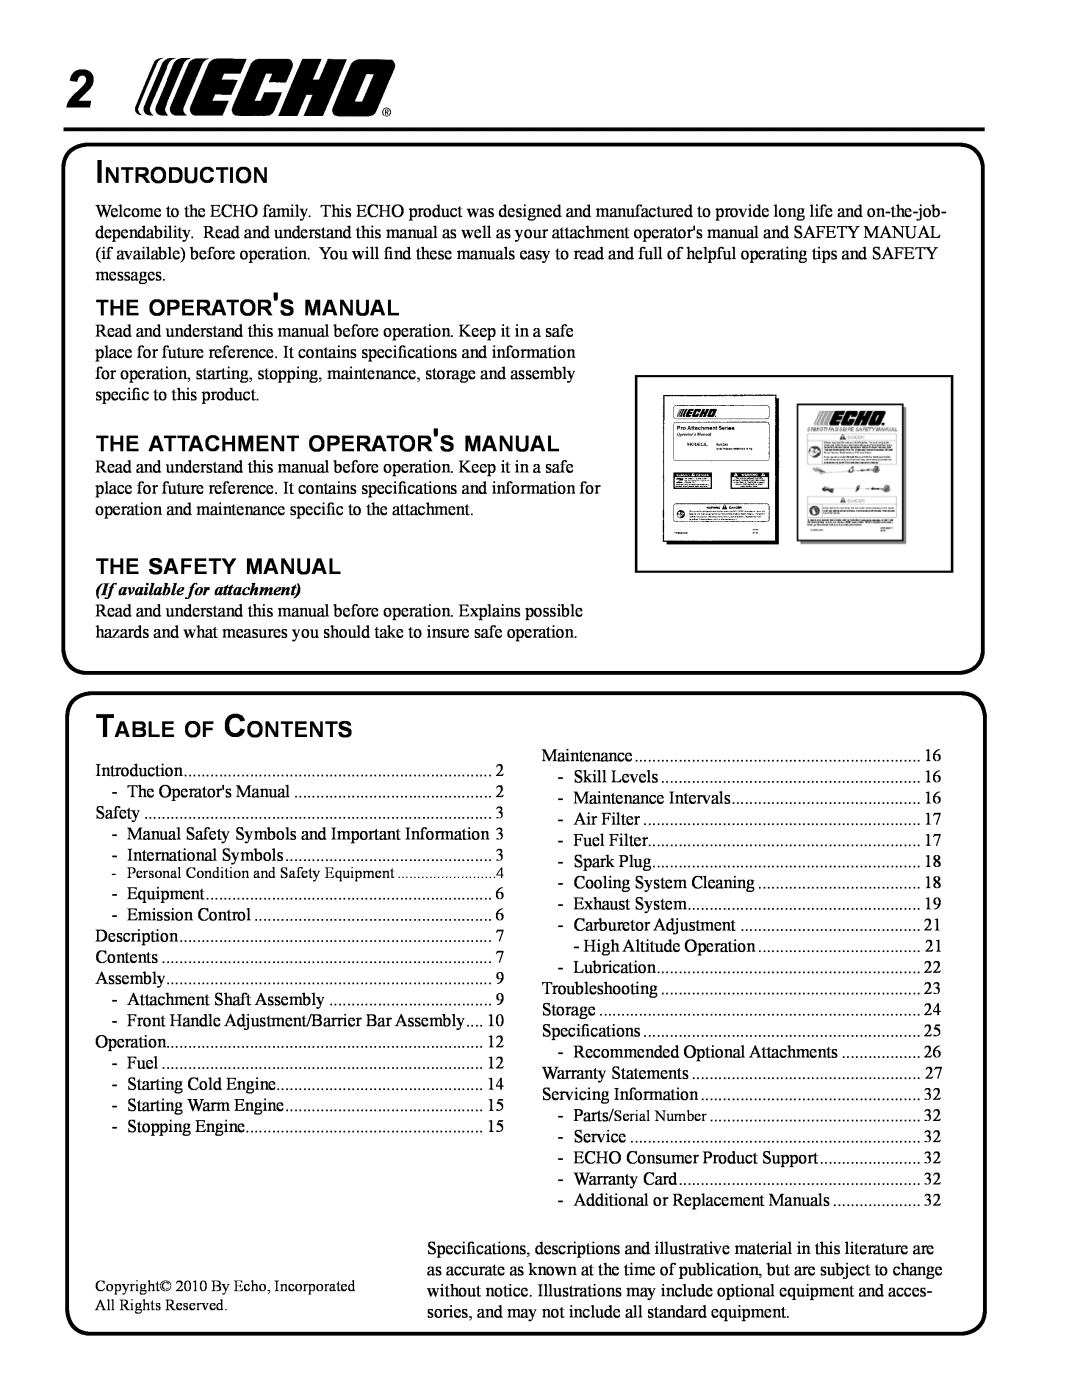 Echo PAS-265 Introduction, the operators manual, the attachment operators manual, the safety manual, Table of Contents 